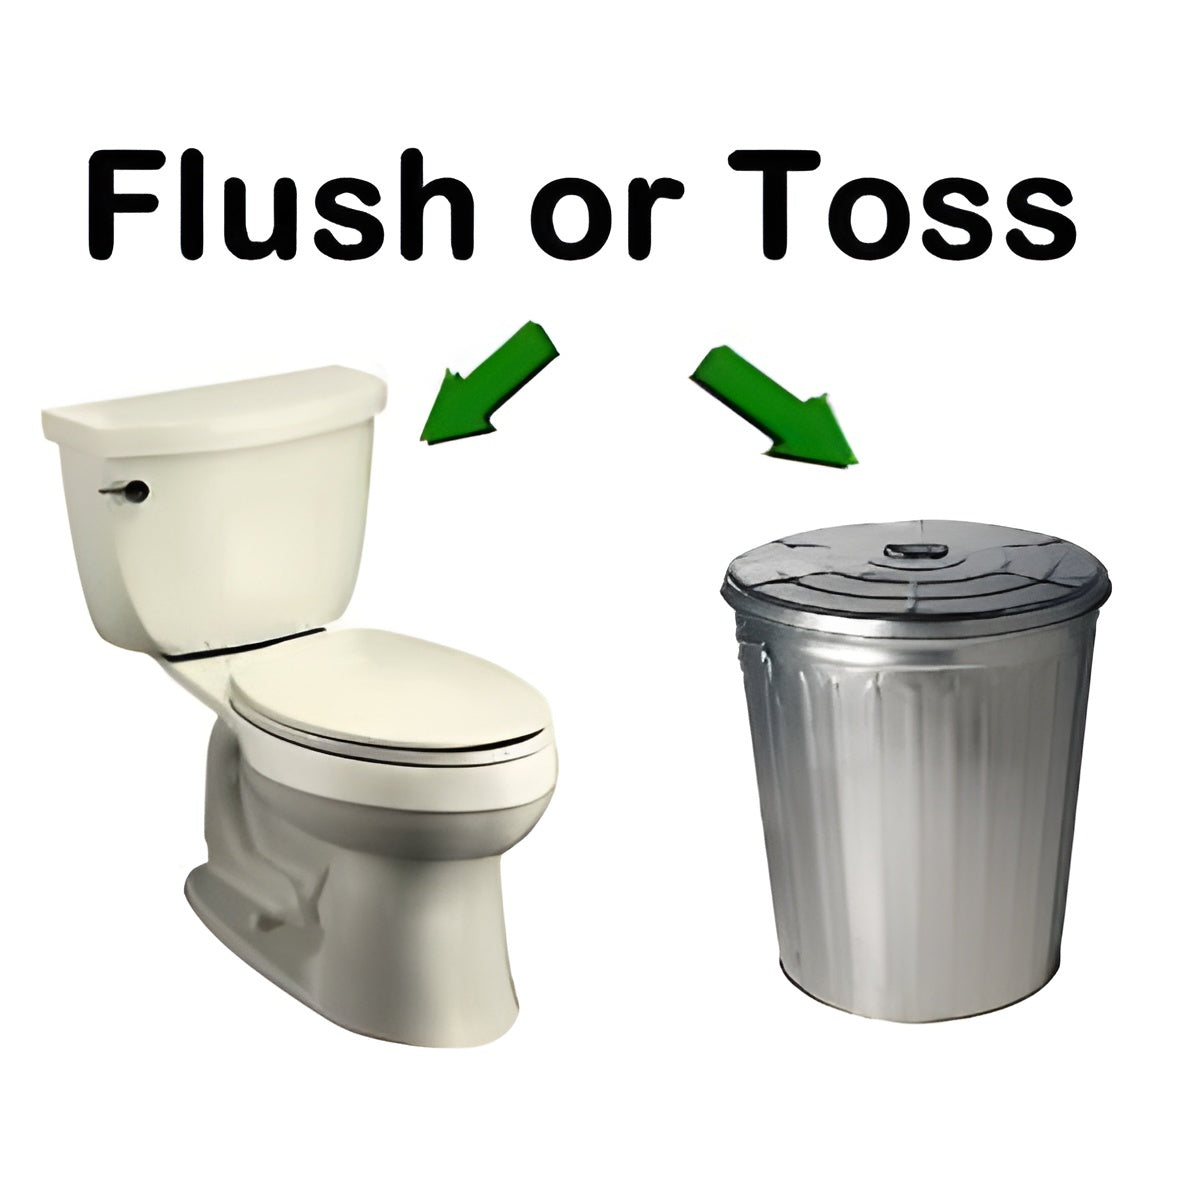 Our bags can be flushed or tossed in the trash can.